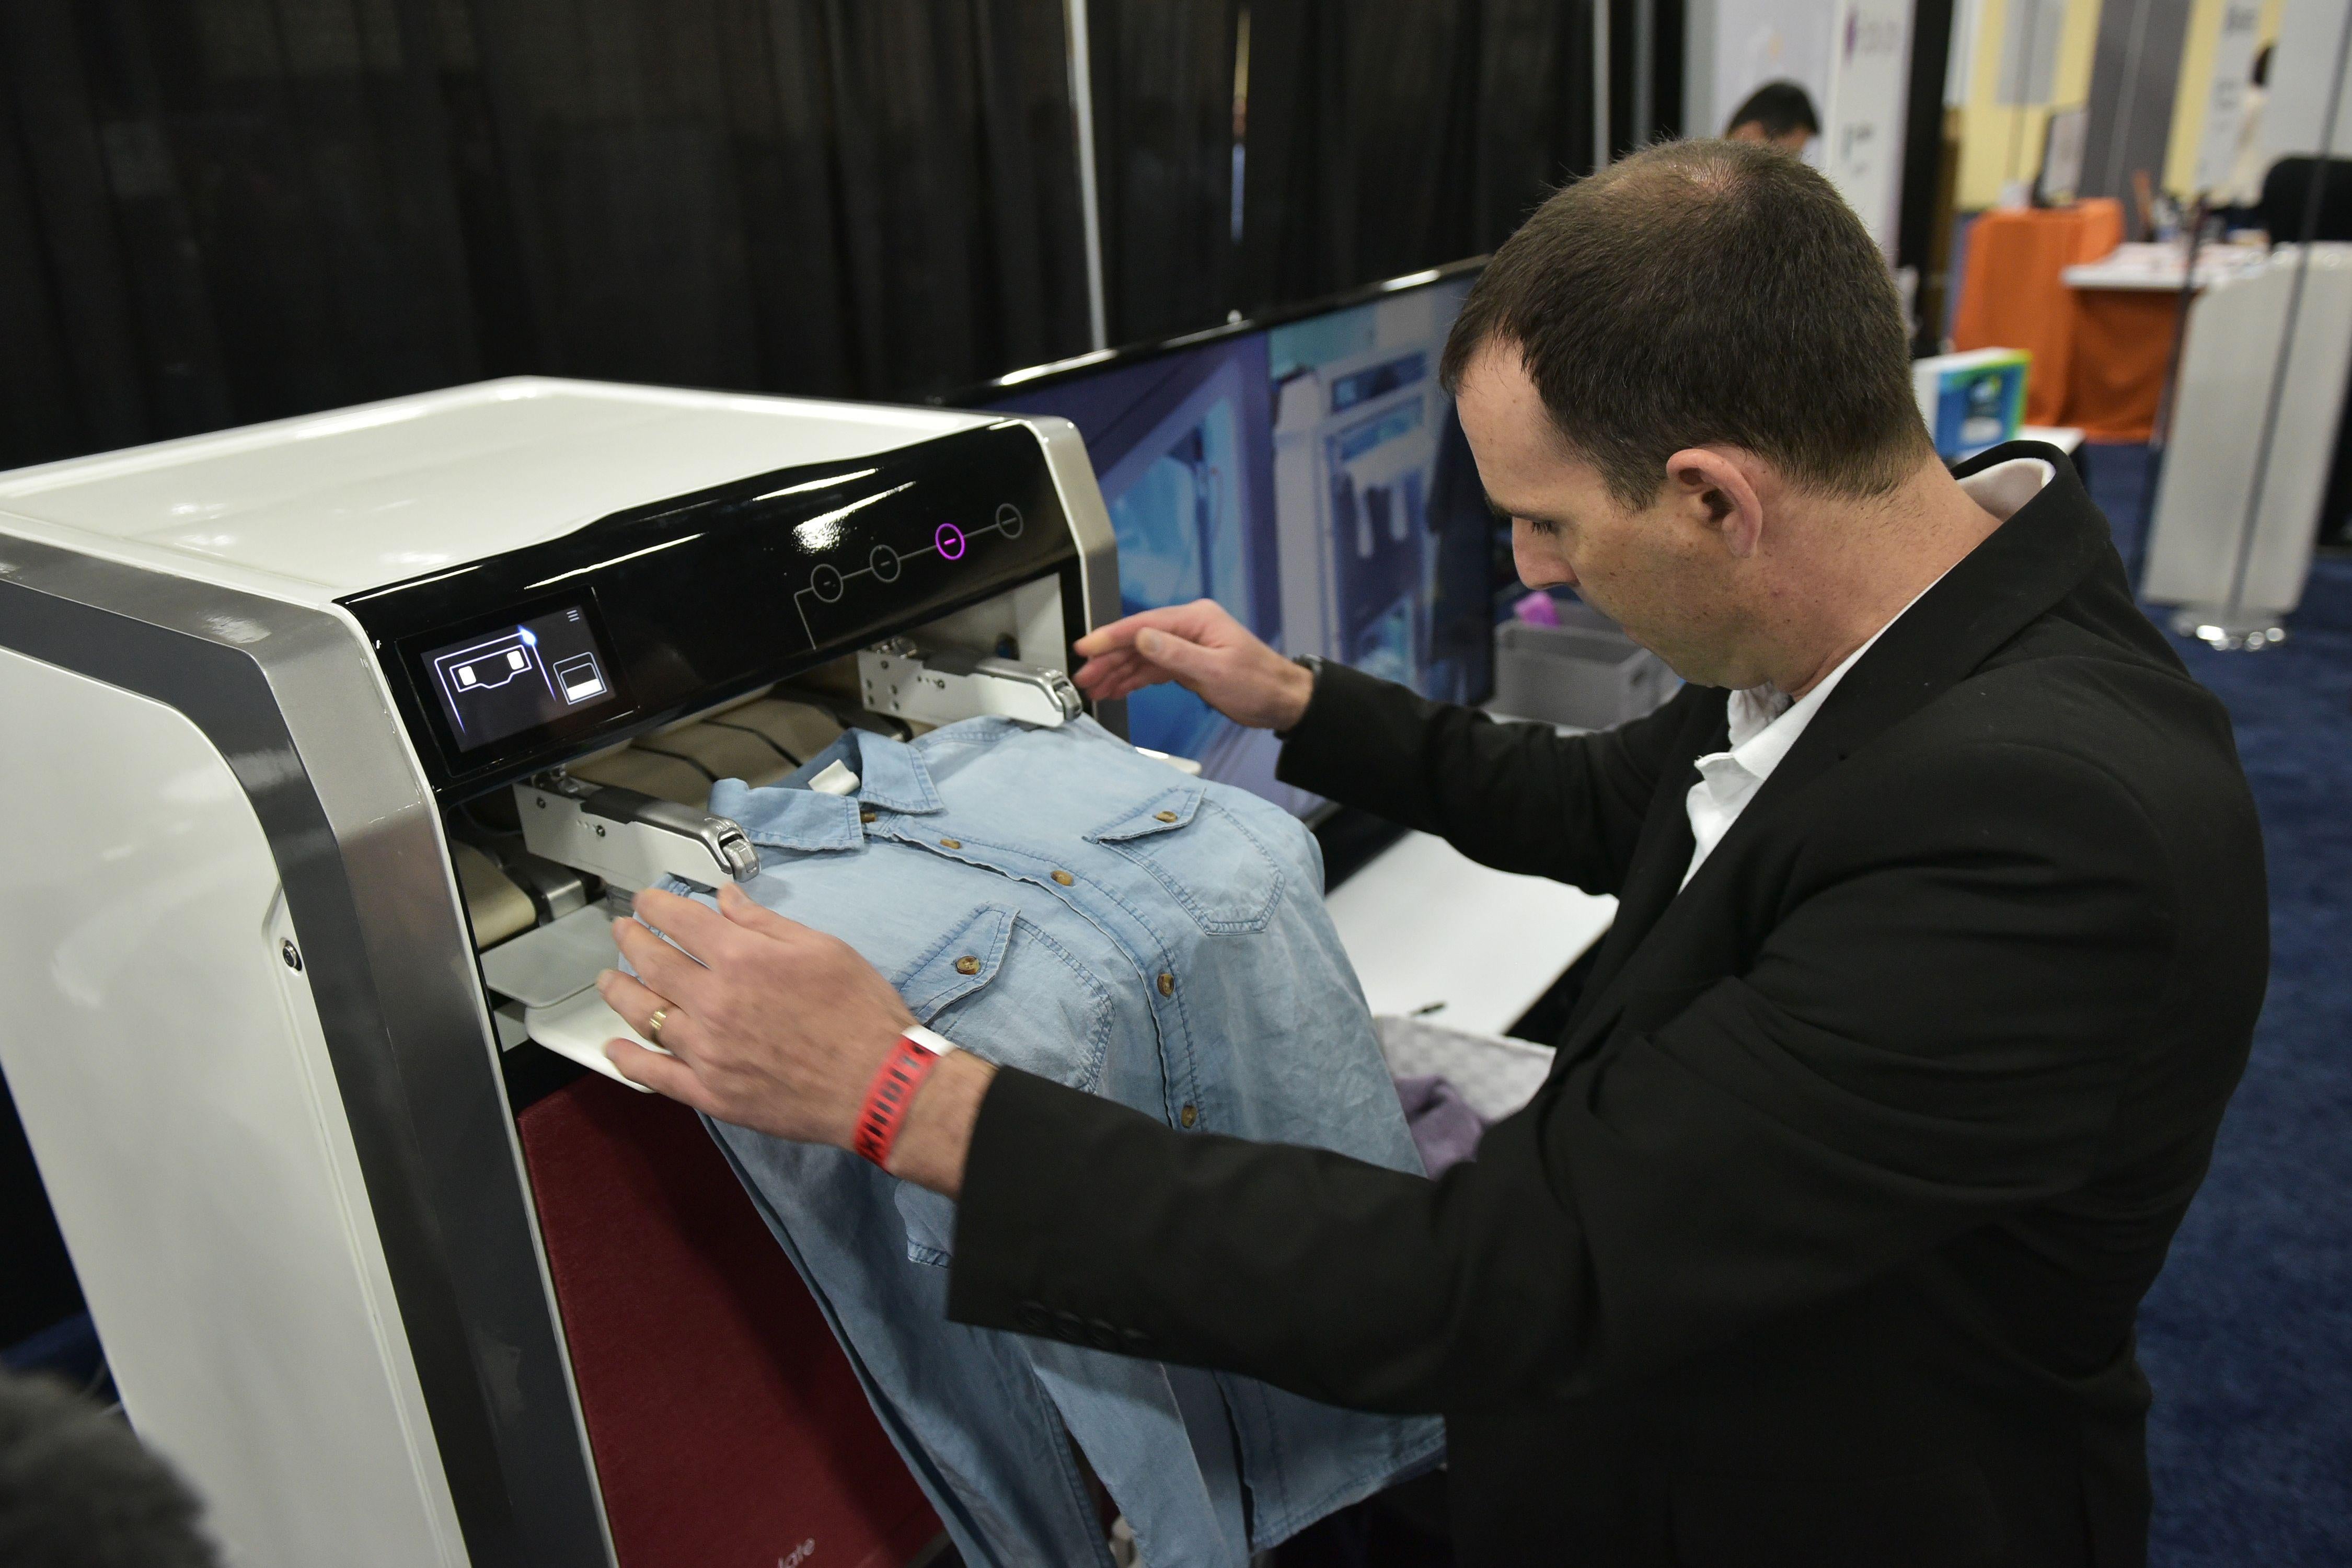 An exhibitor demostrates the FoldiMate laundry folding machine during the CES Unveiled preview event at the Mandalay Bay Convention Center during CES 2018 in Las Vegas on January 7, 2018. / AFP PHOTO / MANDEL NGAN        (Photo credit should read MANDEL NGAN/AFP/Getty Images)